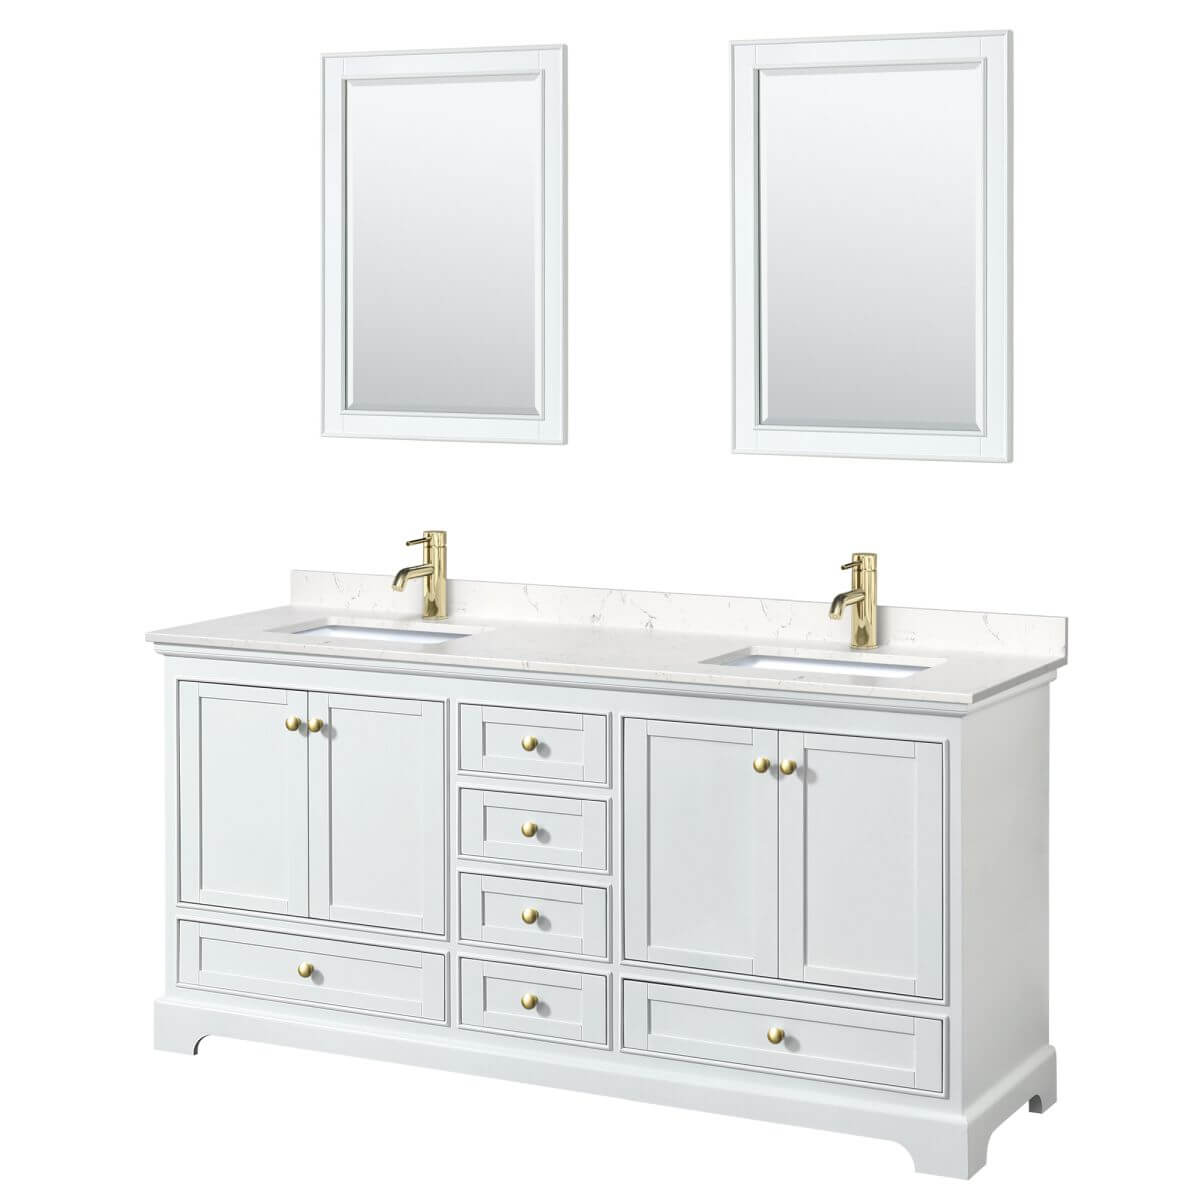 Wyndham Collection Deborah 72 inch Double Bathroom Vanity in White with Carrara Cultured Marble Countertop, Undermount Square Sinks, Brushed Gold Trim and 24 inch Mirrors - WCS202072DWGC2UNSM24